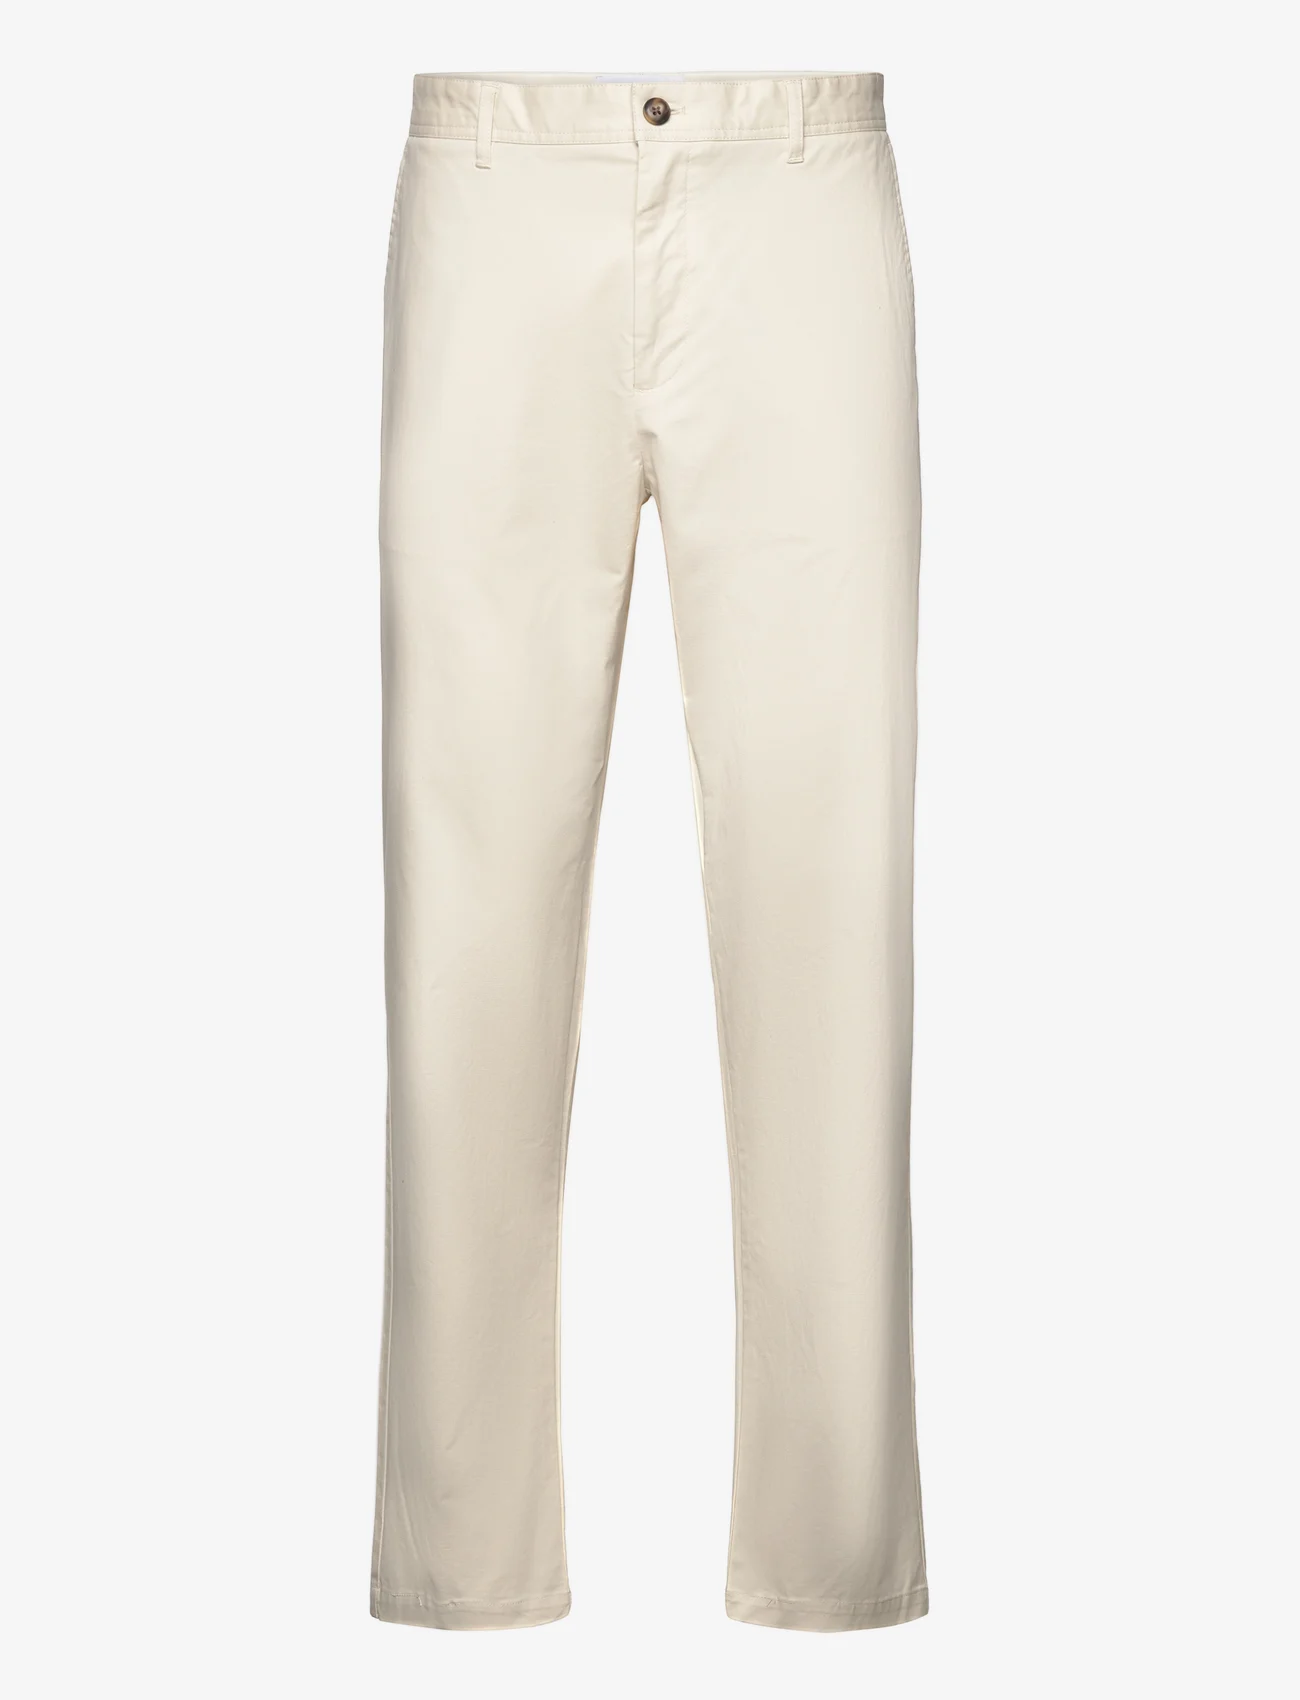 Les Deux - Jared Twill Chino Pants - chinos - ivory - 0